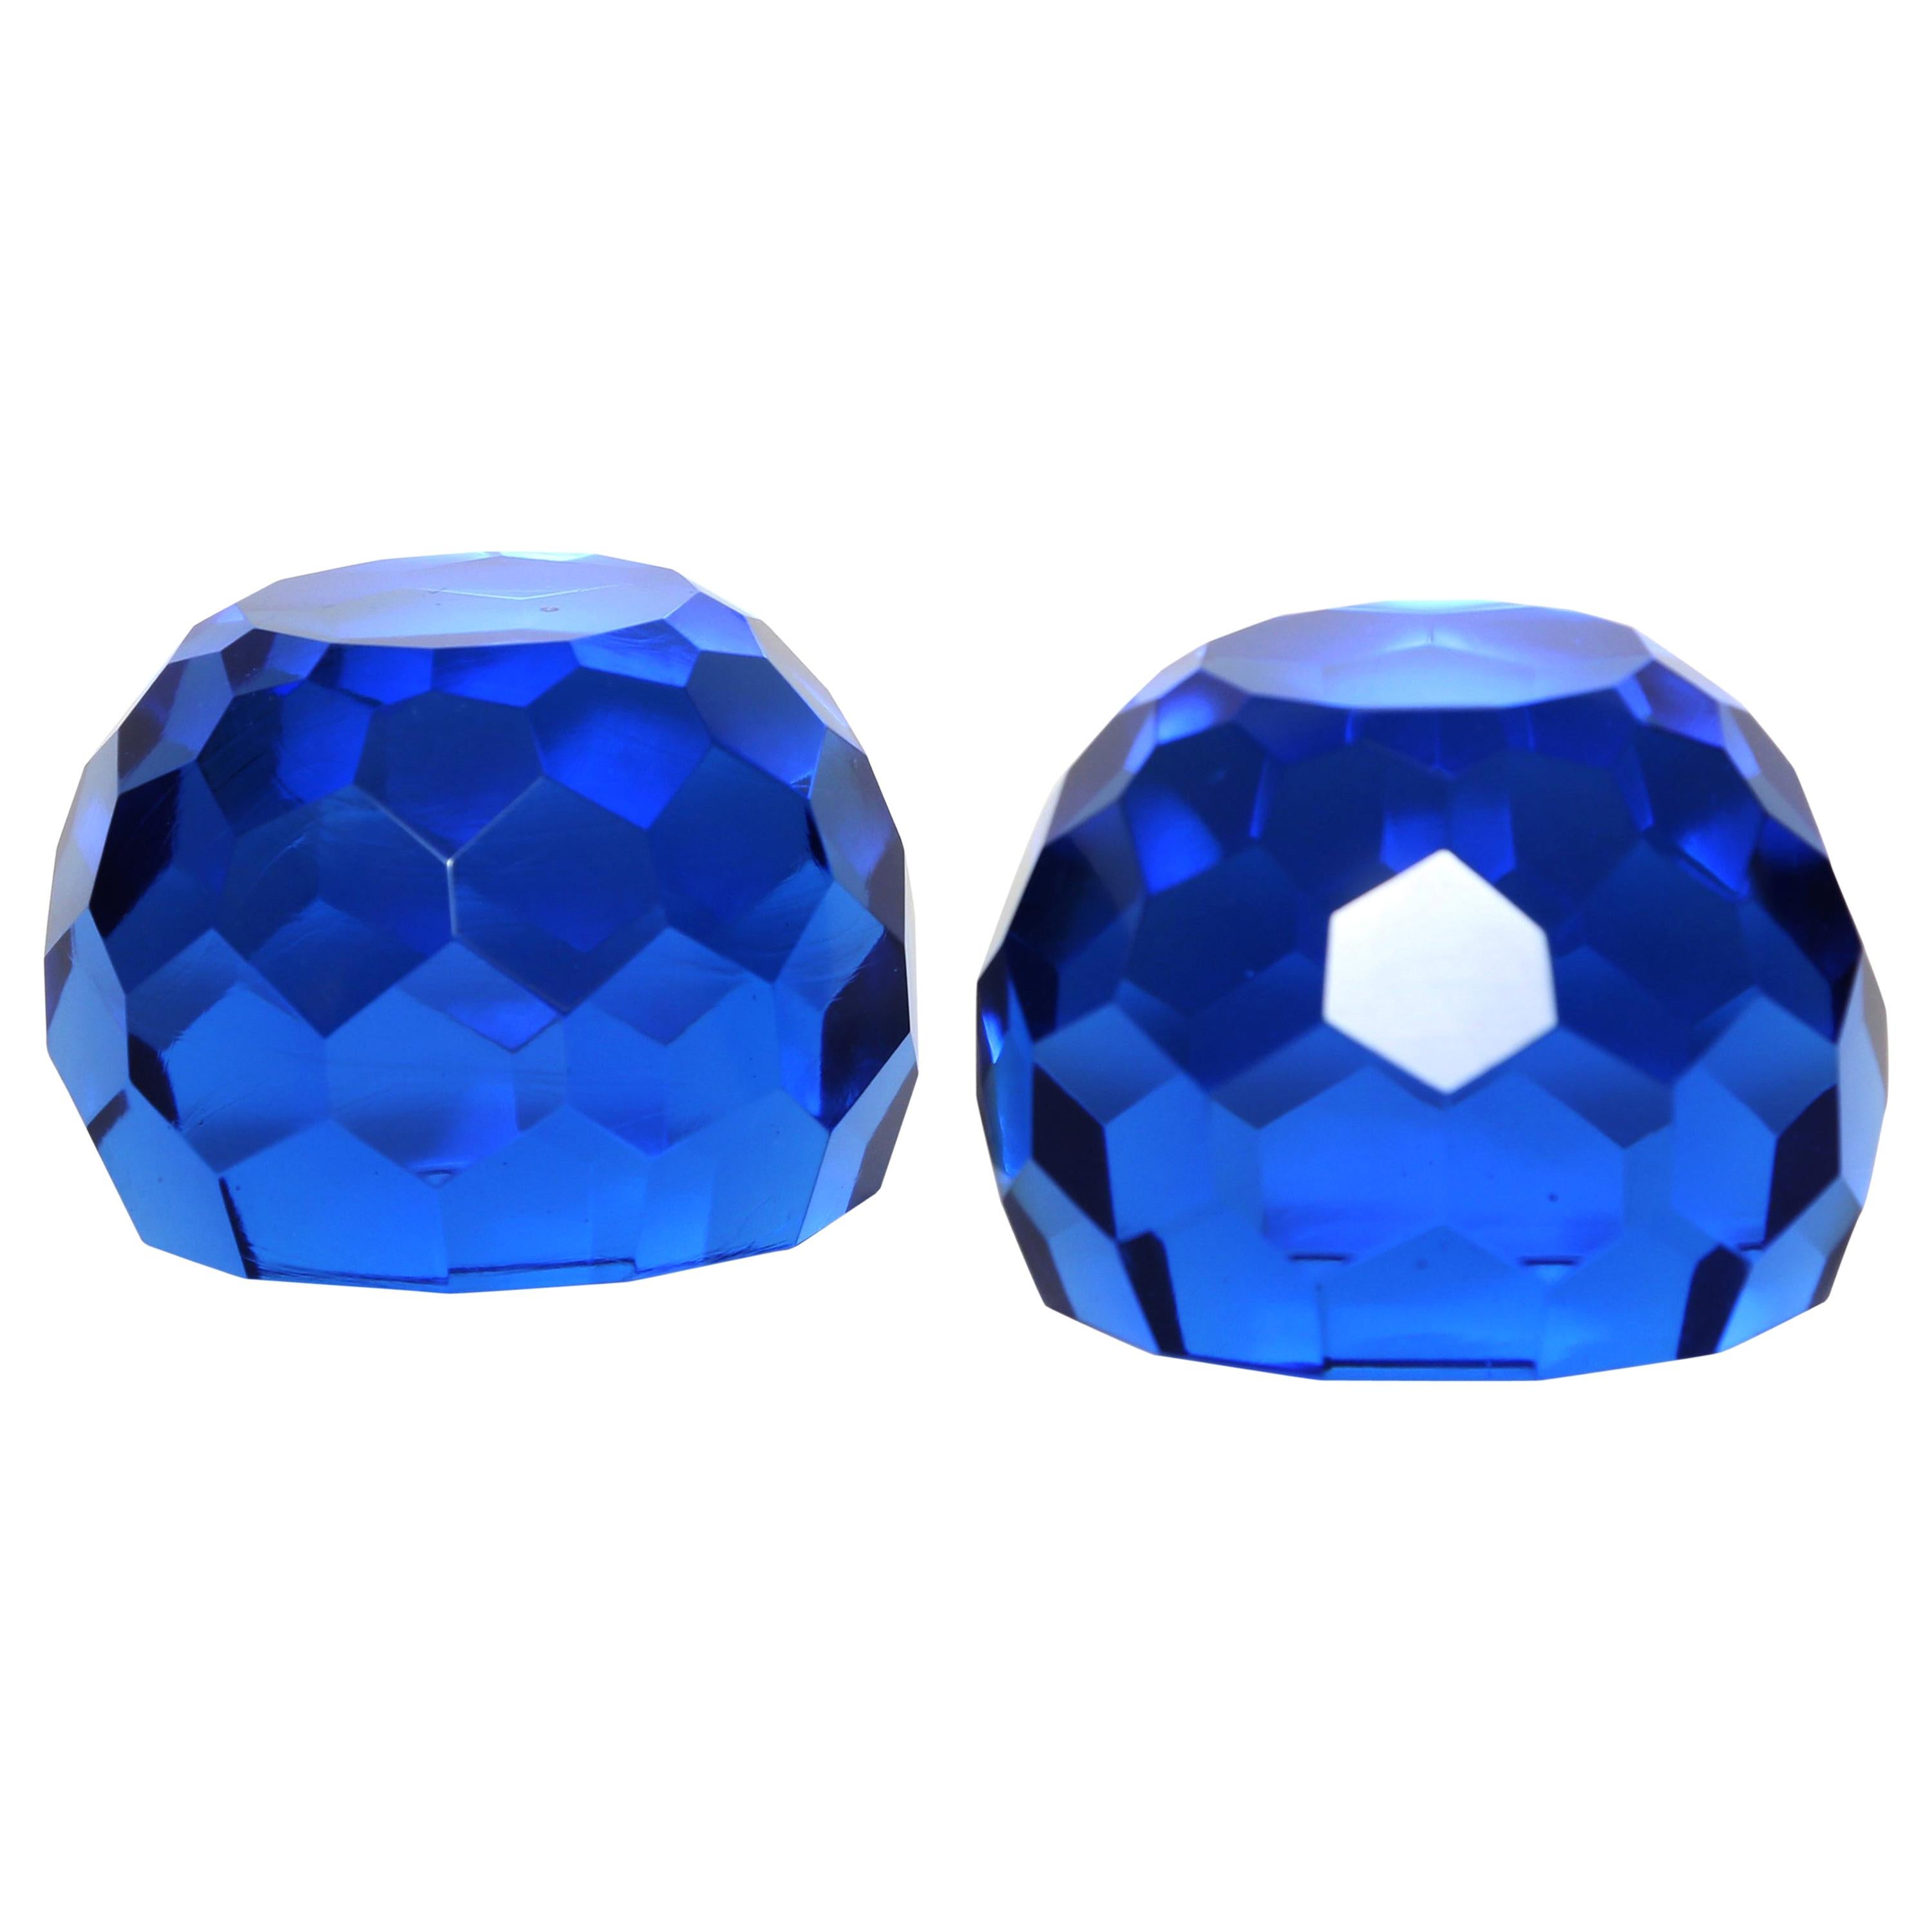 Matched Pair of Cobalt Blue Faceted Crystal Paperweights